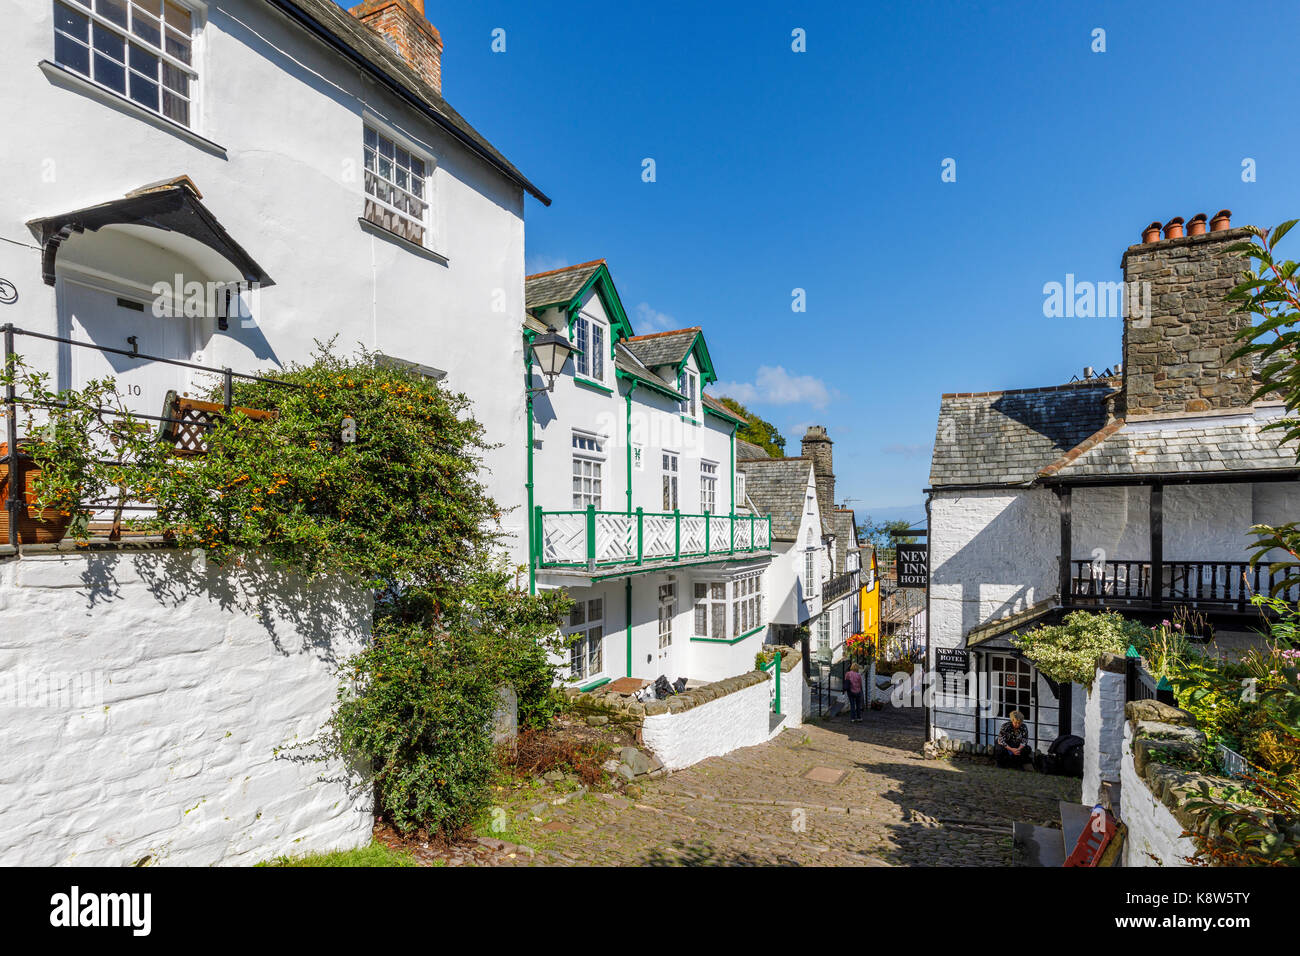 Clovelly, a small heritage village in north Devon, a tourist attraction famous for its steep pedestrianised cobbled main street, donkeys and sea views Stock Photo